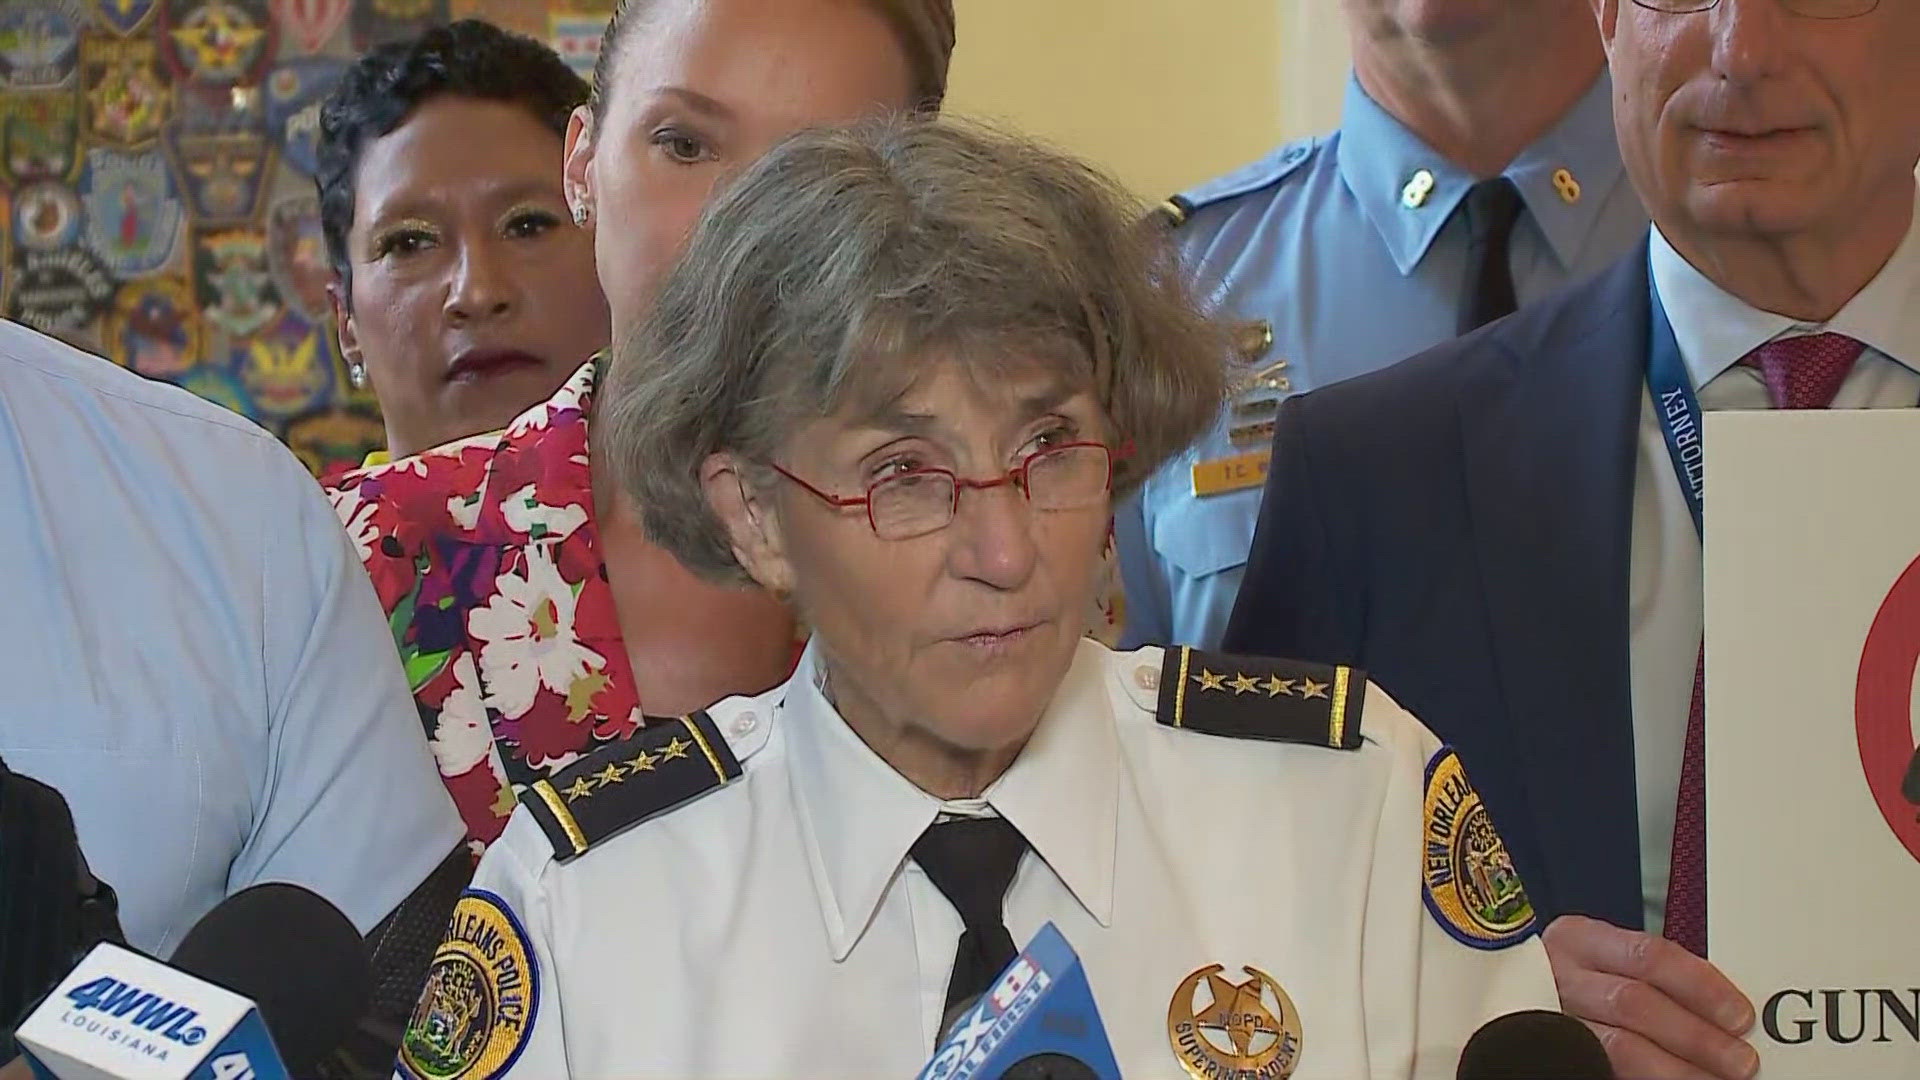 NOPD Chief Anne Kirkpatrick and city leaders outline their plan for enforcing new gun laws.